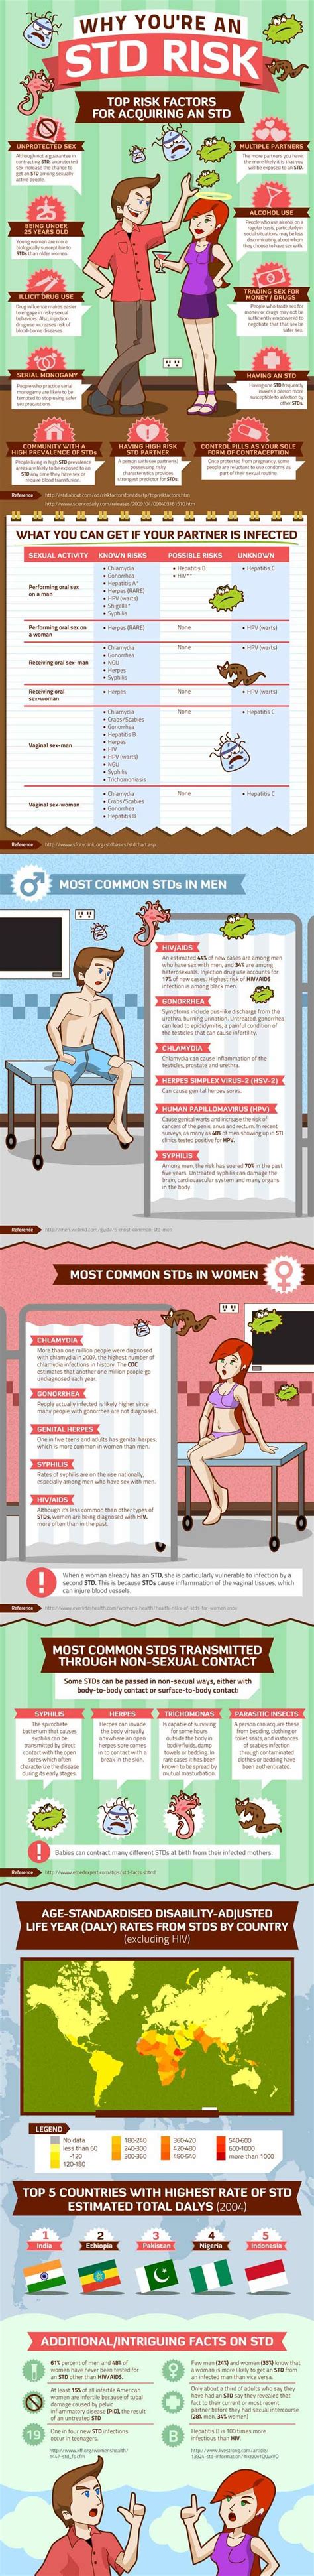 36 best sexually transmitted infections images on pinterest health ha ha and health education